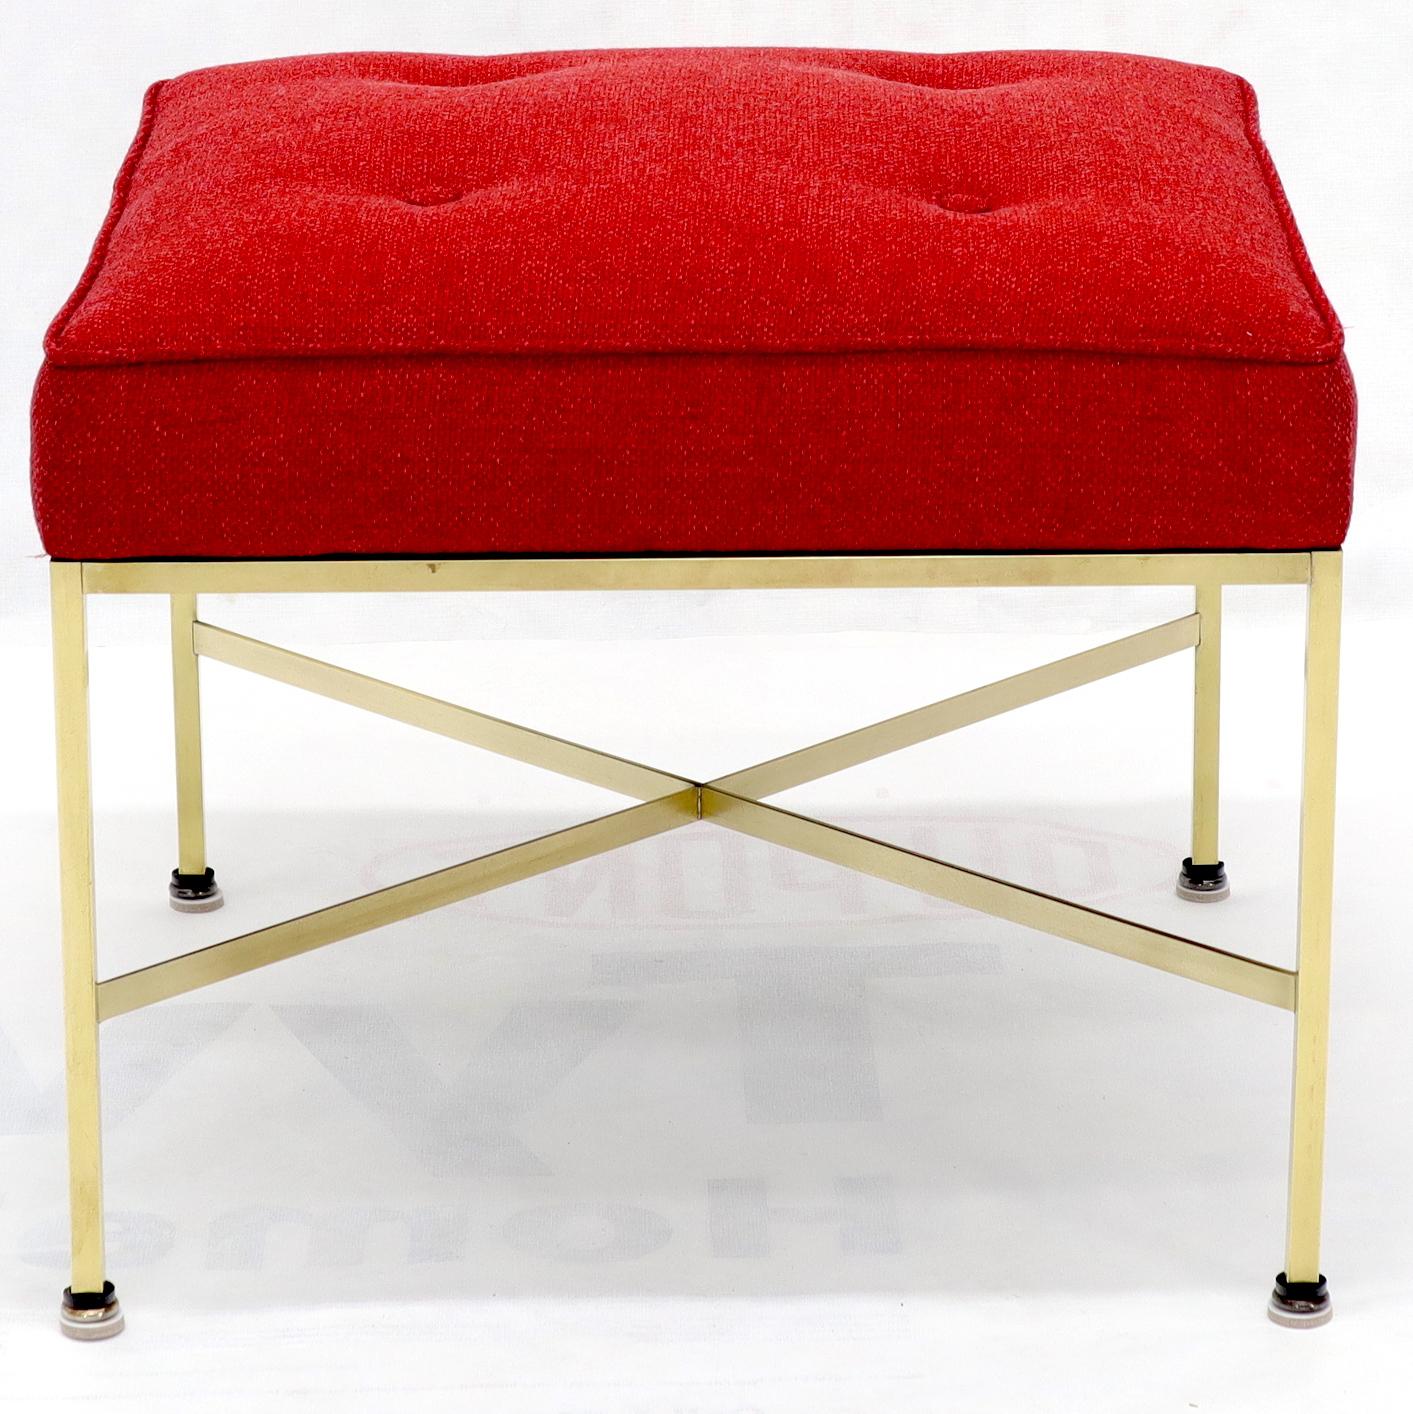 Pair of New Red Upholstery Square Brass Frames Benches Stools by Paul McCobb For Sale 1